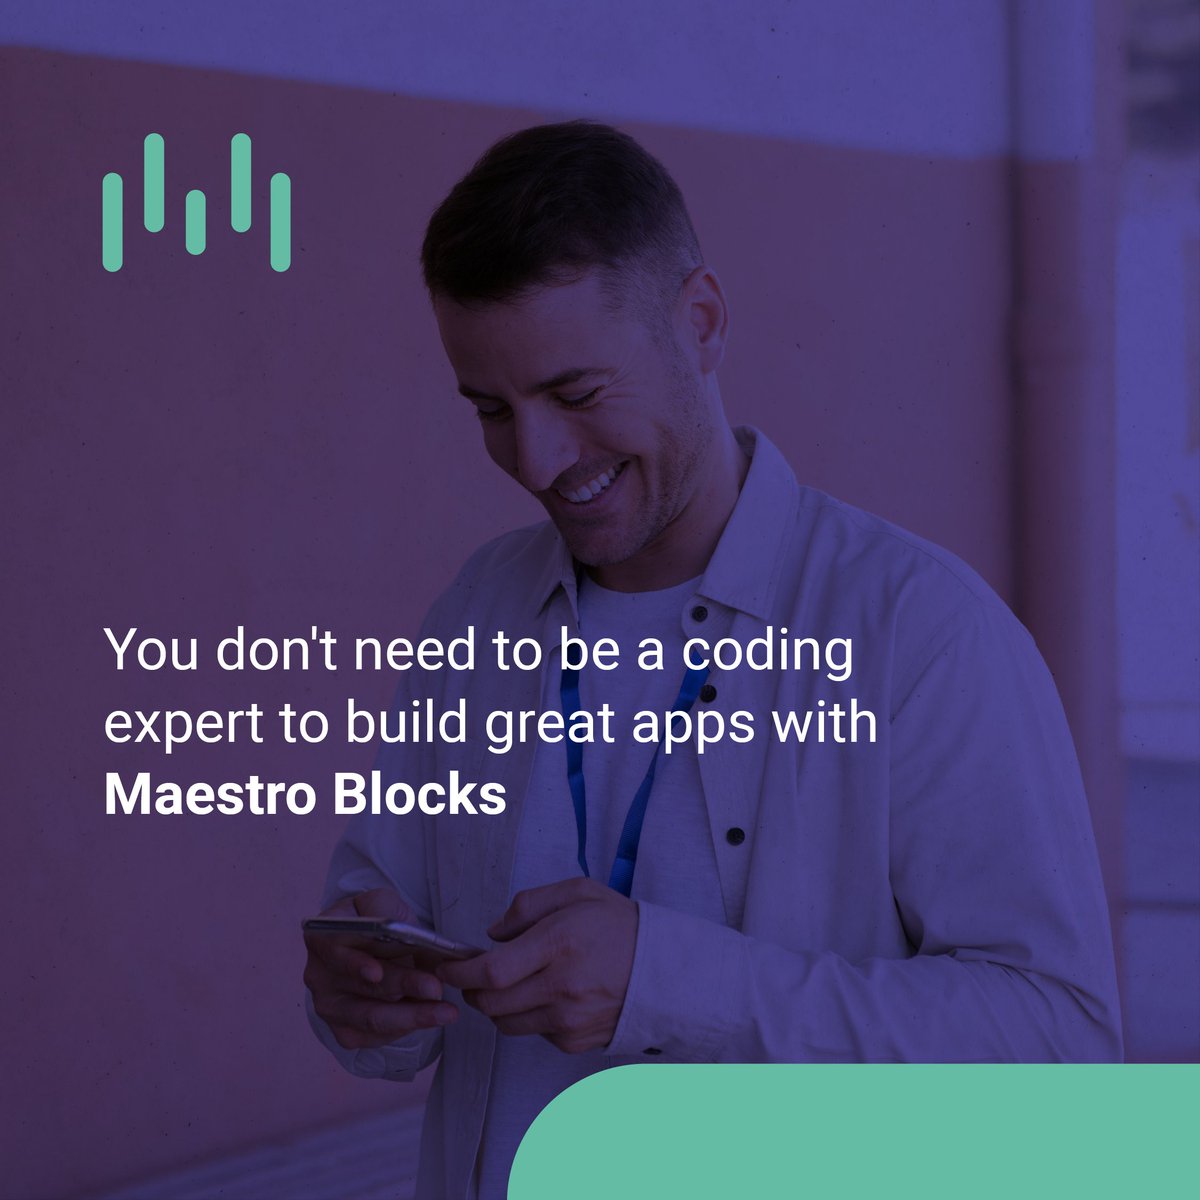 You don't need to be a coding expert to build great apps! Maestro Blocks puts the power in the hands of non-technical users, allowing them to create and modify applications with ease.

Get started now at maestroblocks.com

#apps #technical #MaestroBlocks